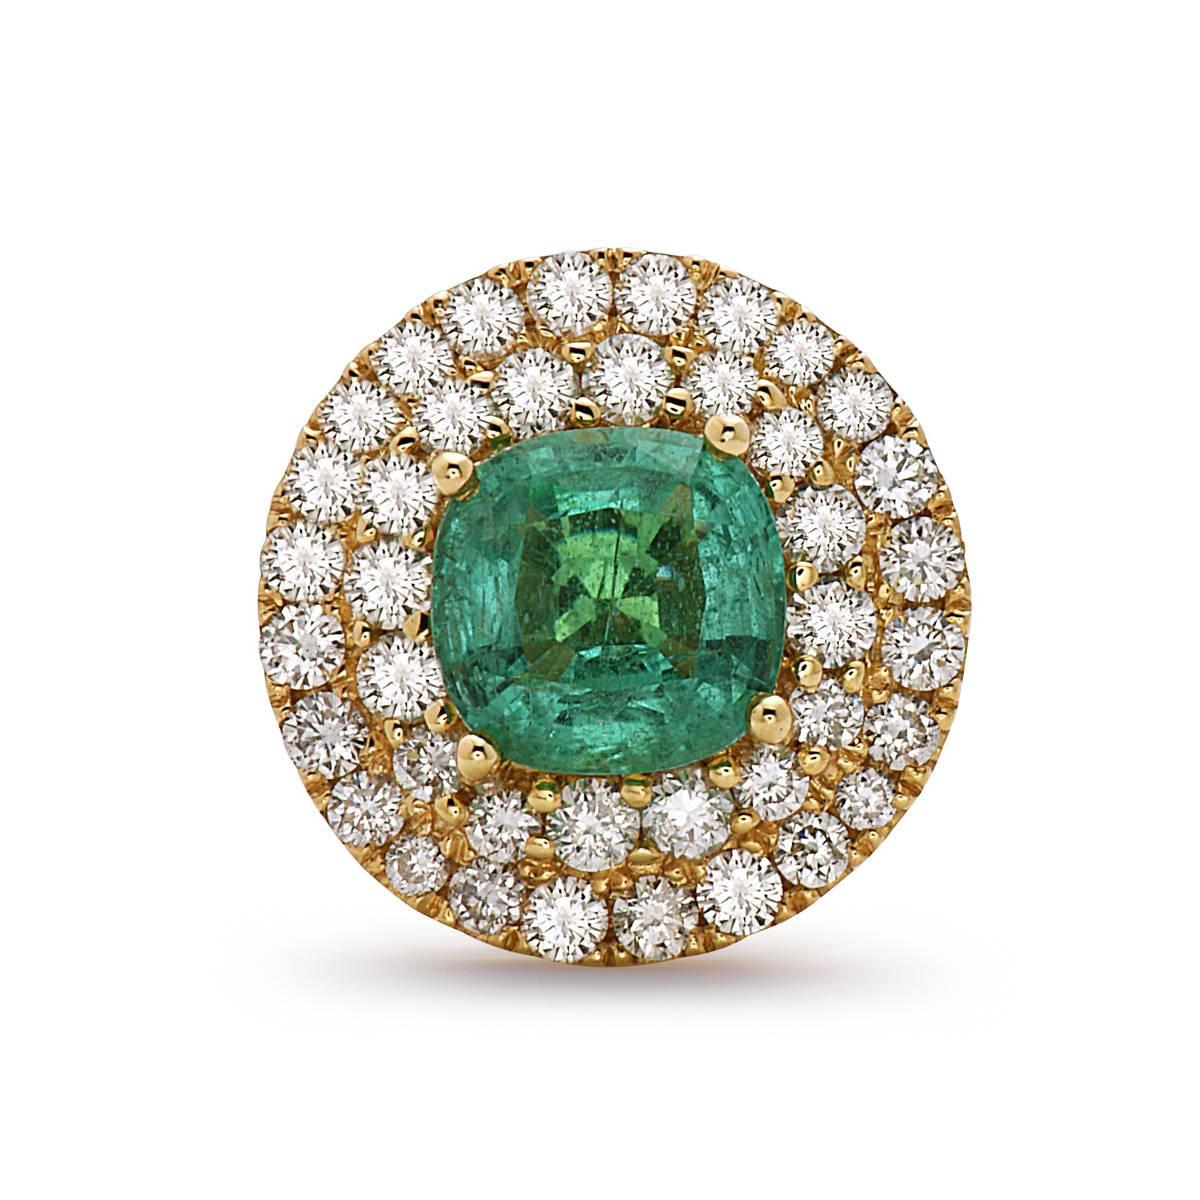 3.93ct Emerald Stud Earrings With Diamonds Made In 18k Gold In New Condition For Sale In New York, NY